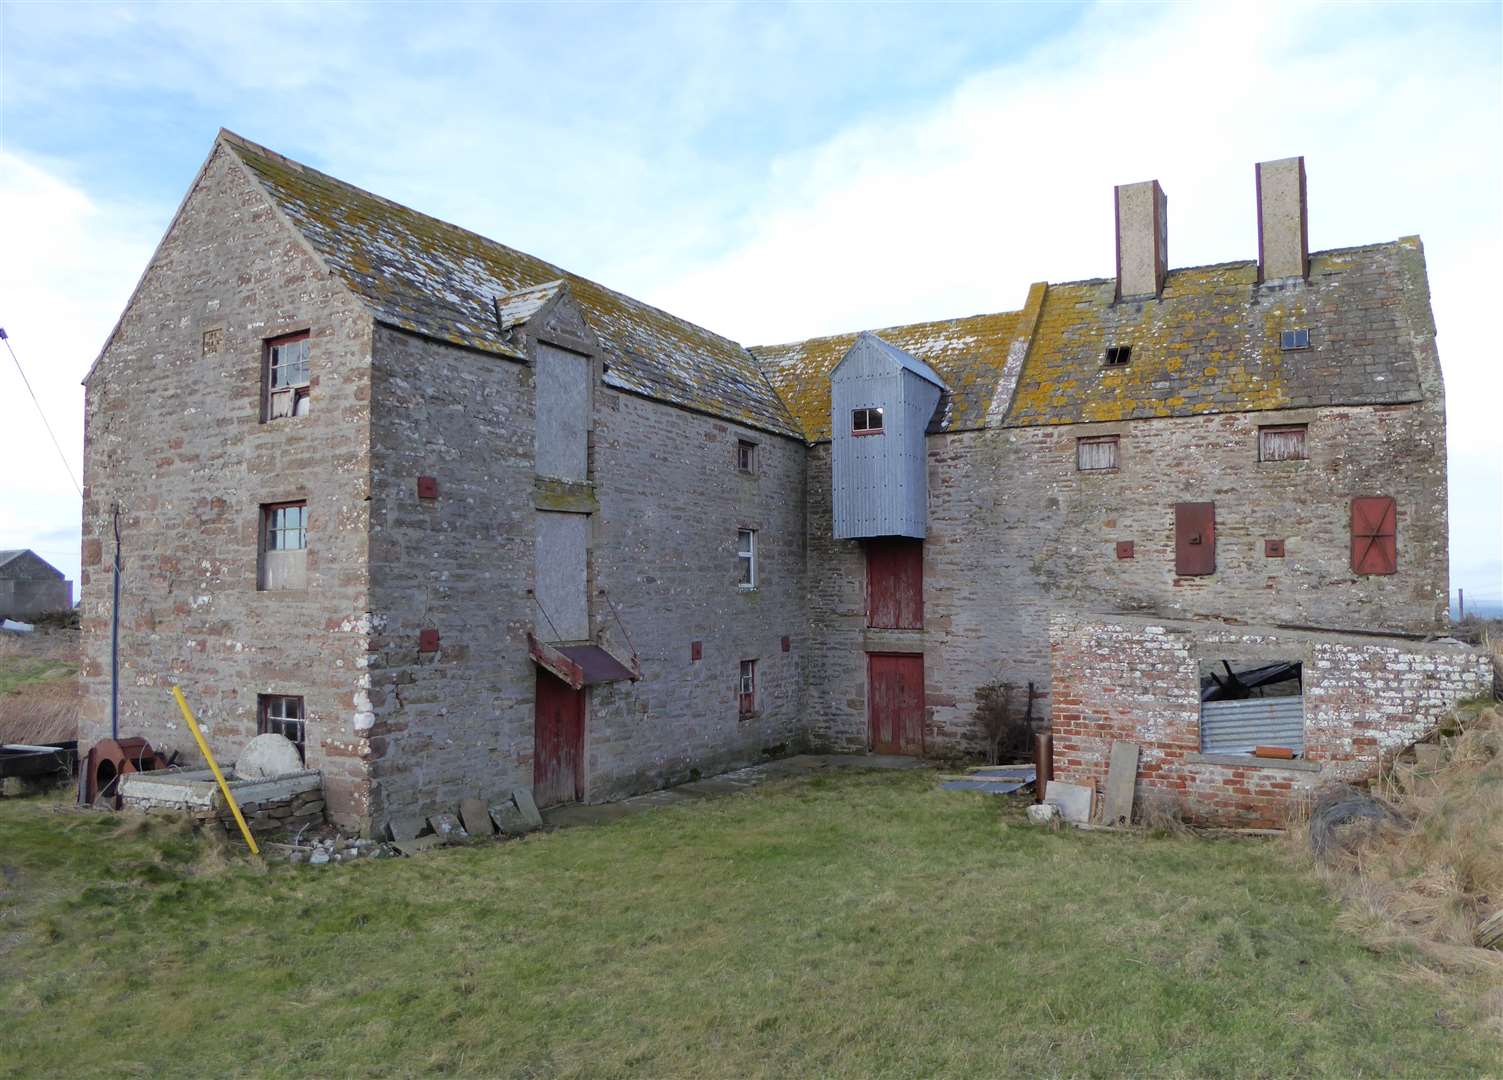 The historic mill at John O’Groats. The trust behind the mill's refurbishment has been awarded £50K. Picture: Doreen Leith